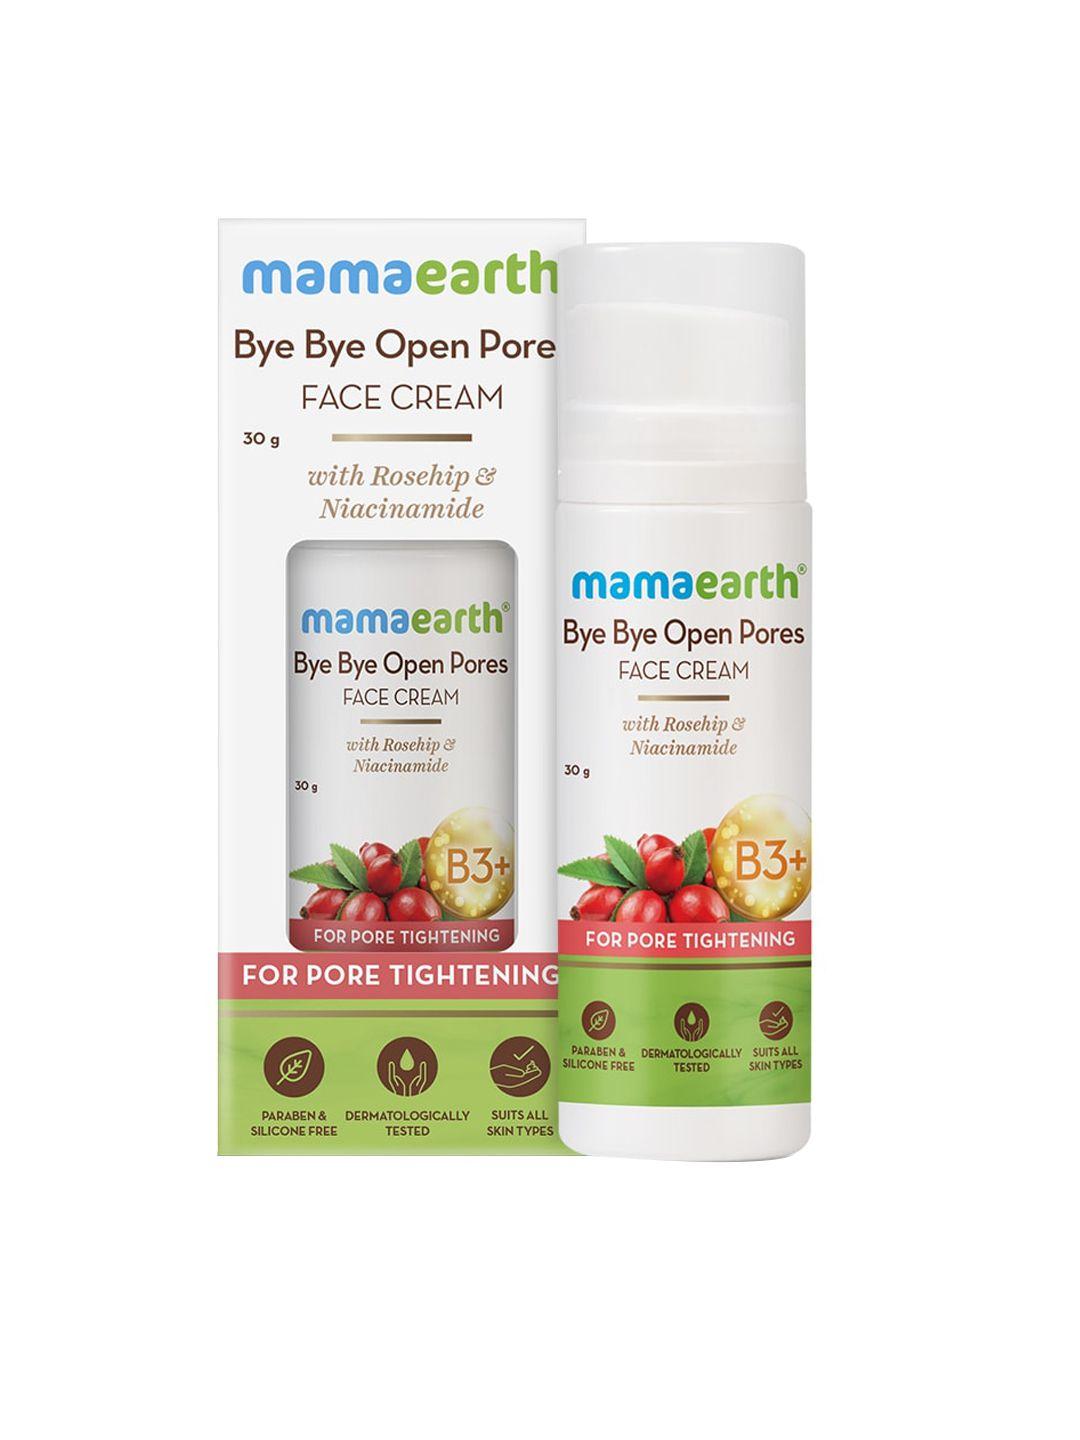 mamaearth bye bye open pores face cream with rosehip & niacinamide - 30 g